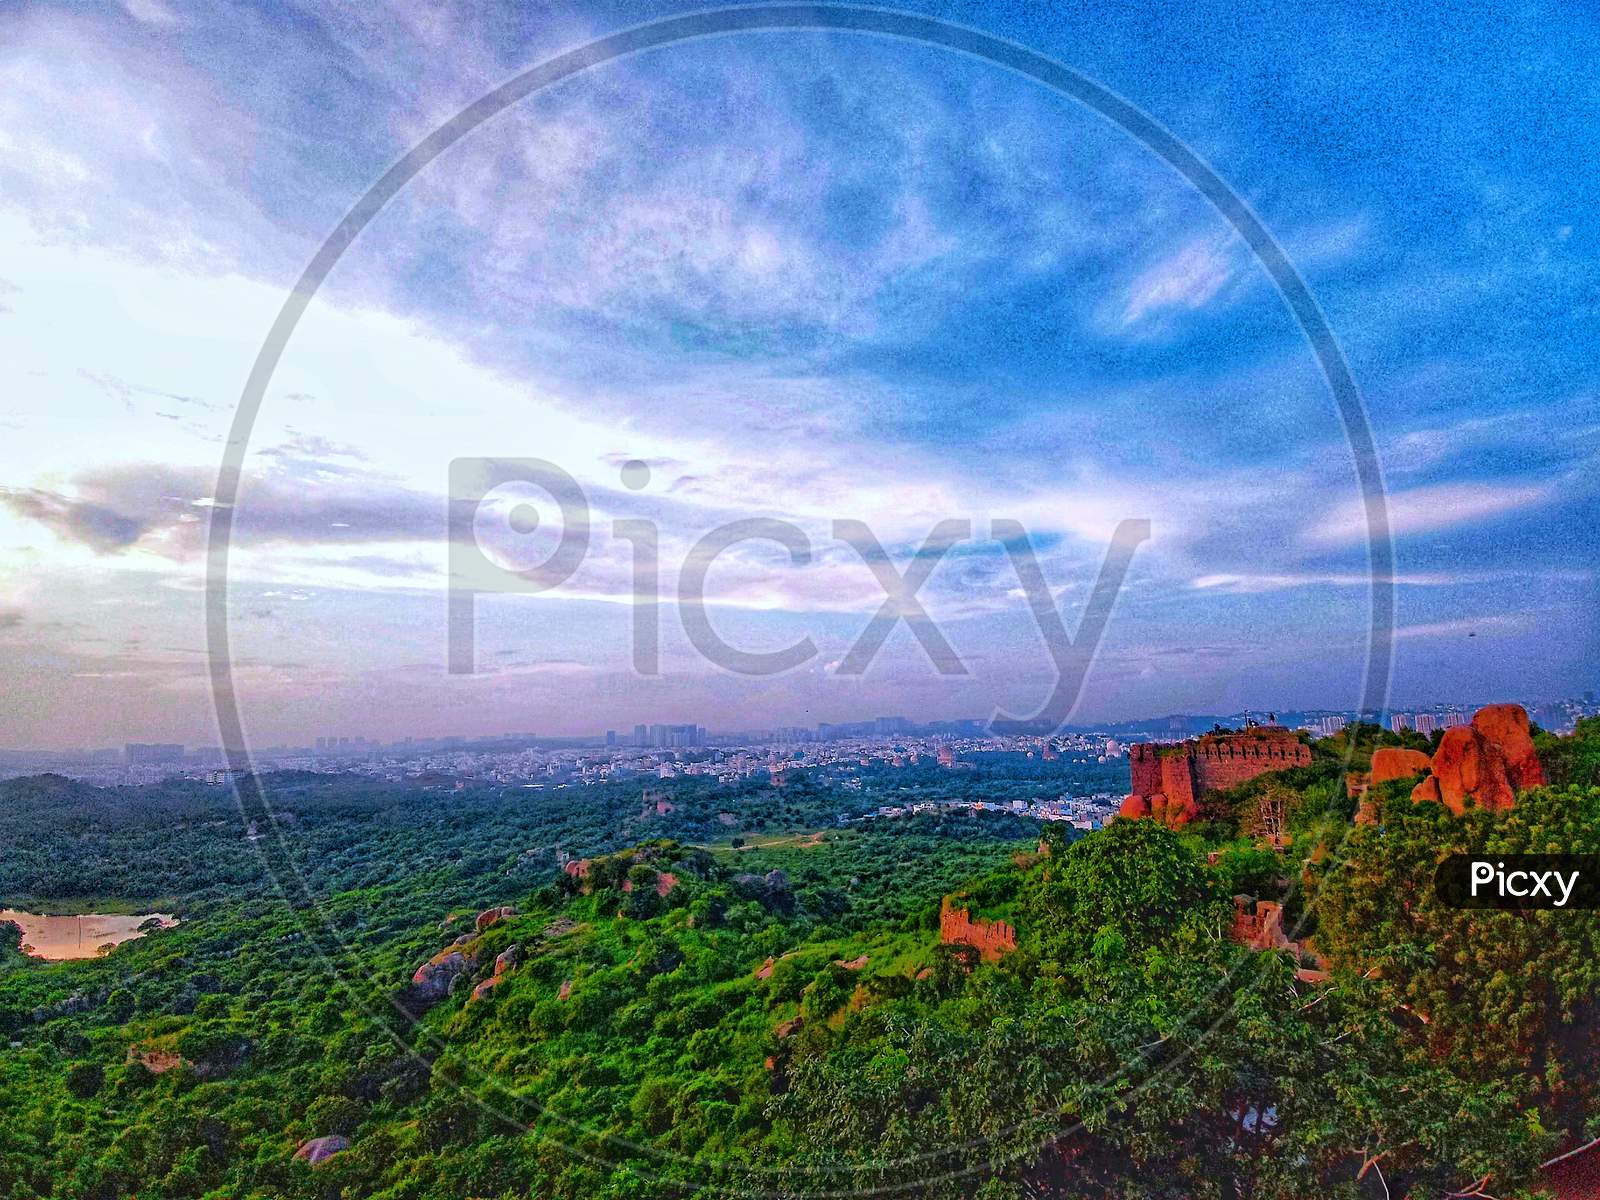 Top view of Golconda fort